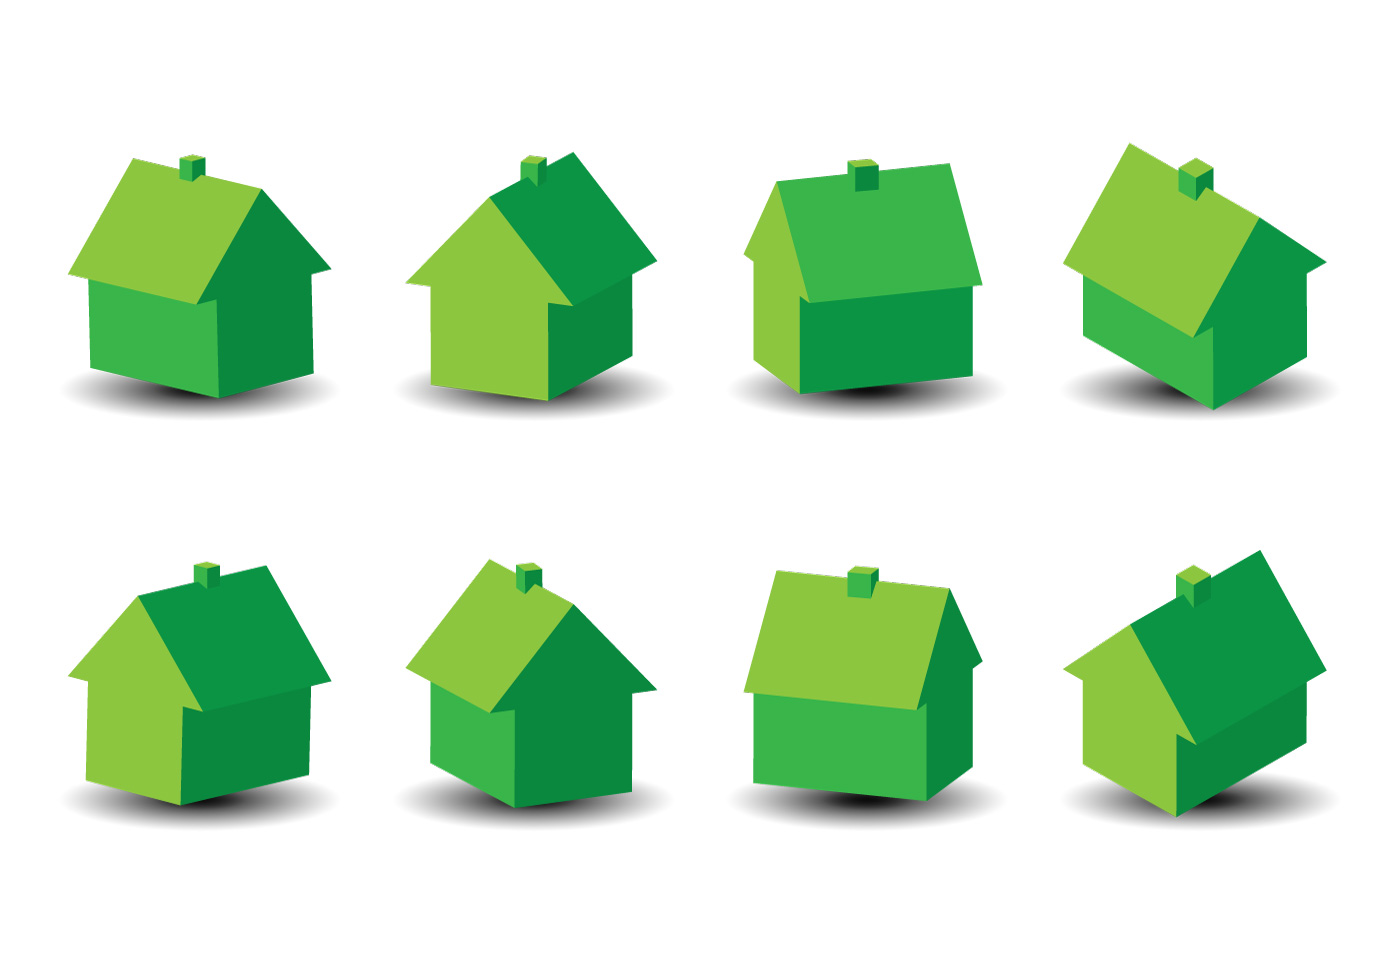 House Free Vector Art - (6576 Free Downloads)